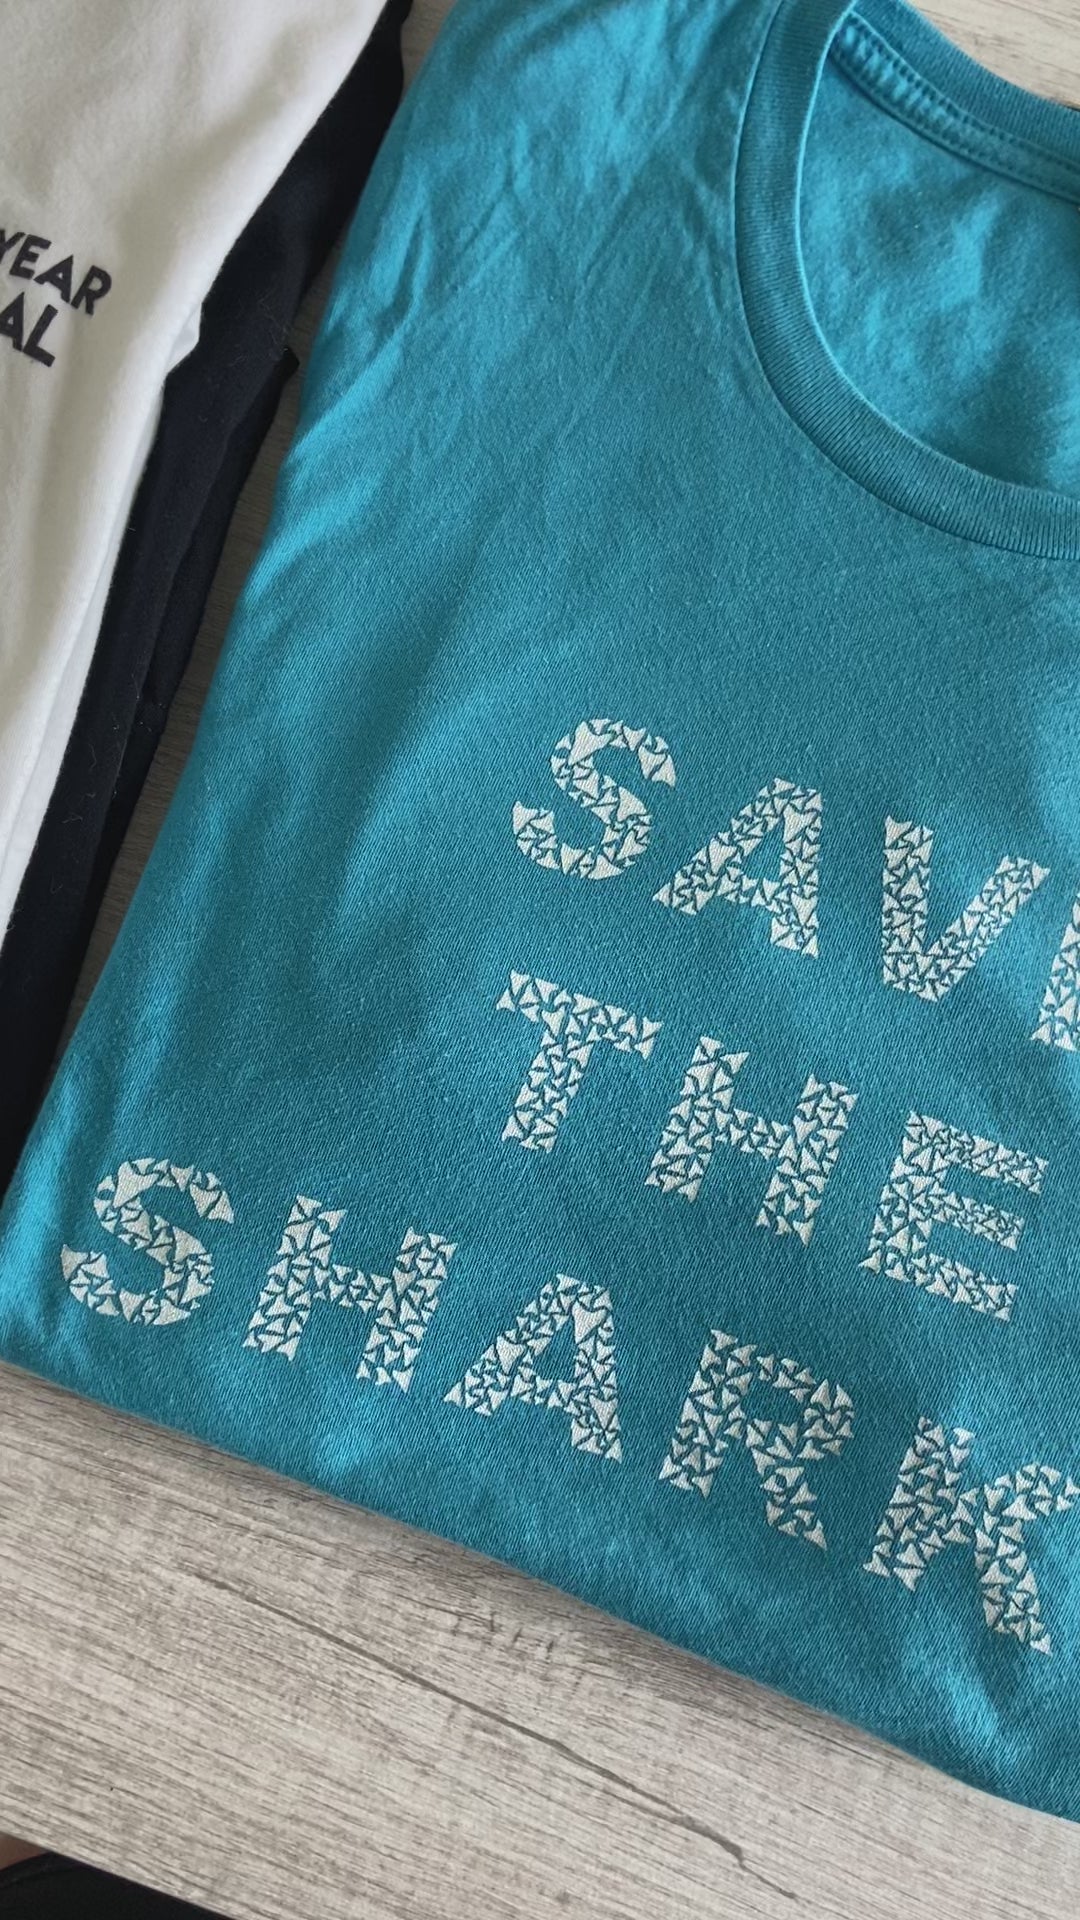 Close up of aqua Save The Sharks Short-Sleeve Unisex T-Shirt reads "Save The Sharks." - getpinkfit - Ethically and Sustainably Made - 10% donated to Oceana shark conservation